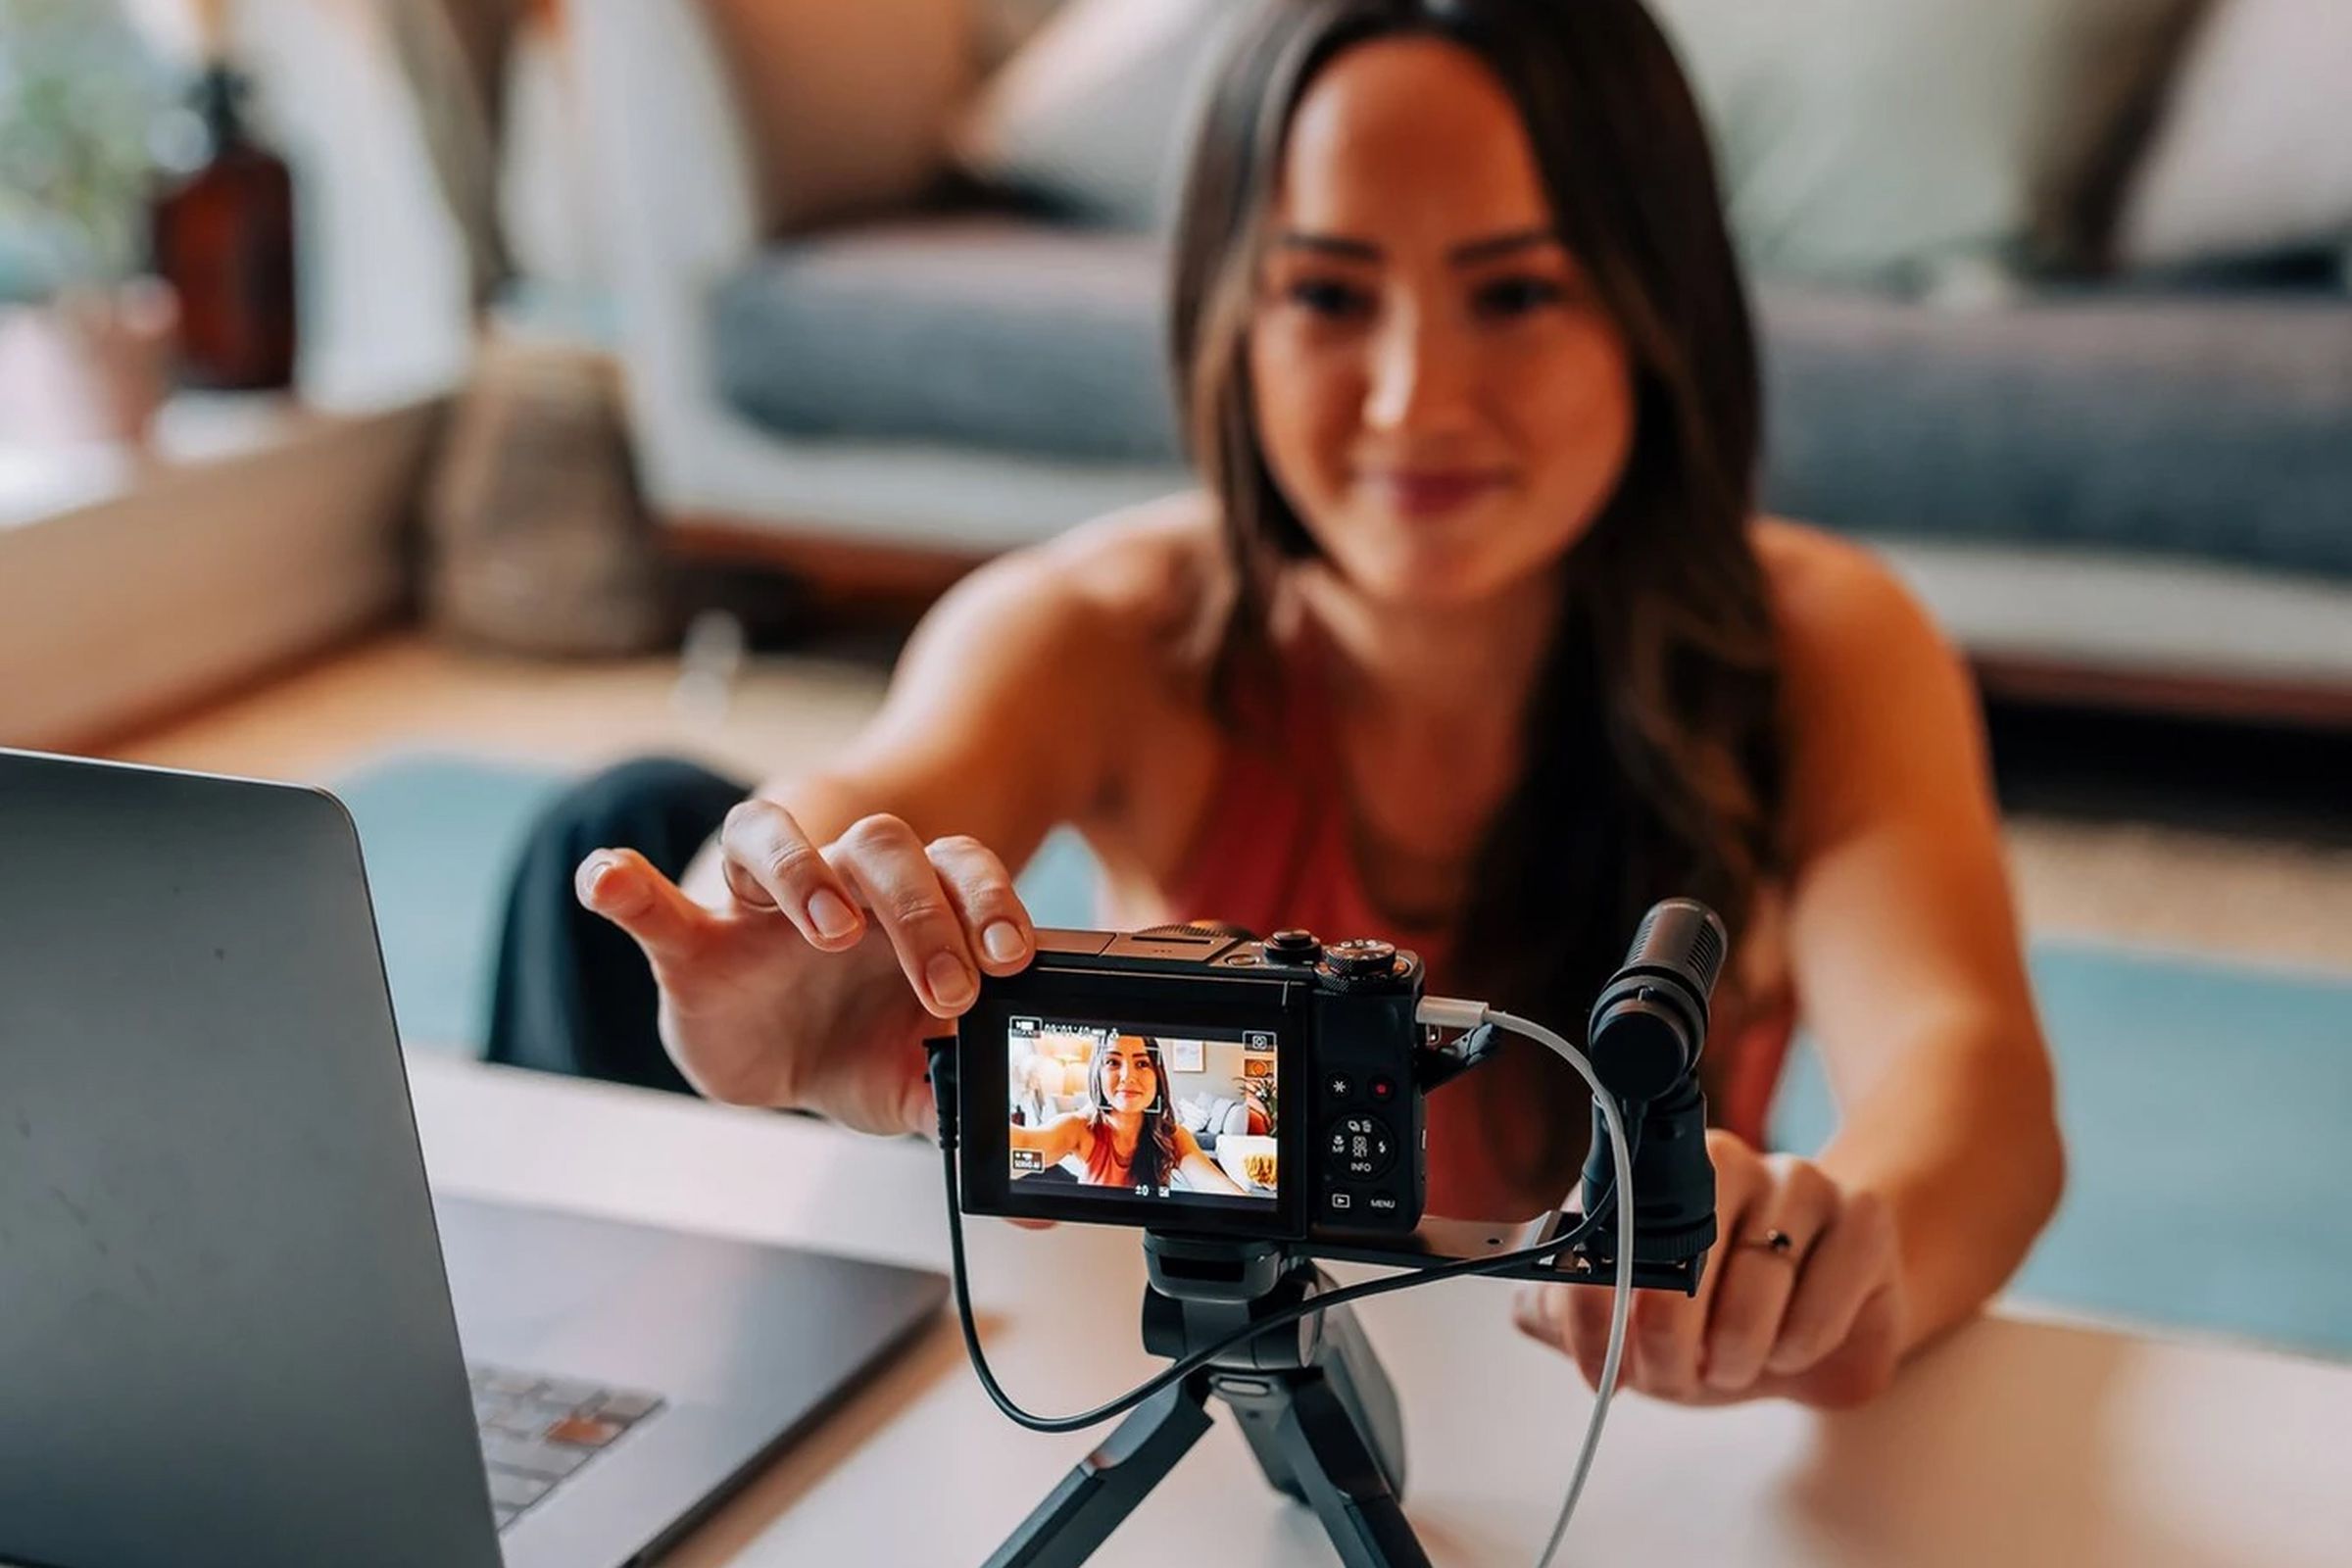 A person setting up a livestream of themselves at home with a tripod-mounted camera connected to a laptop.